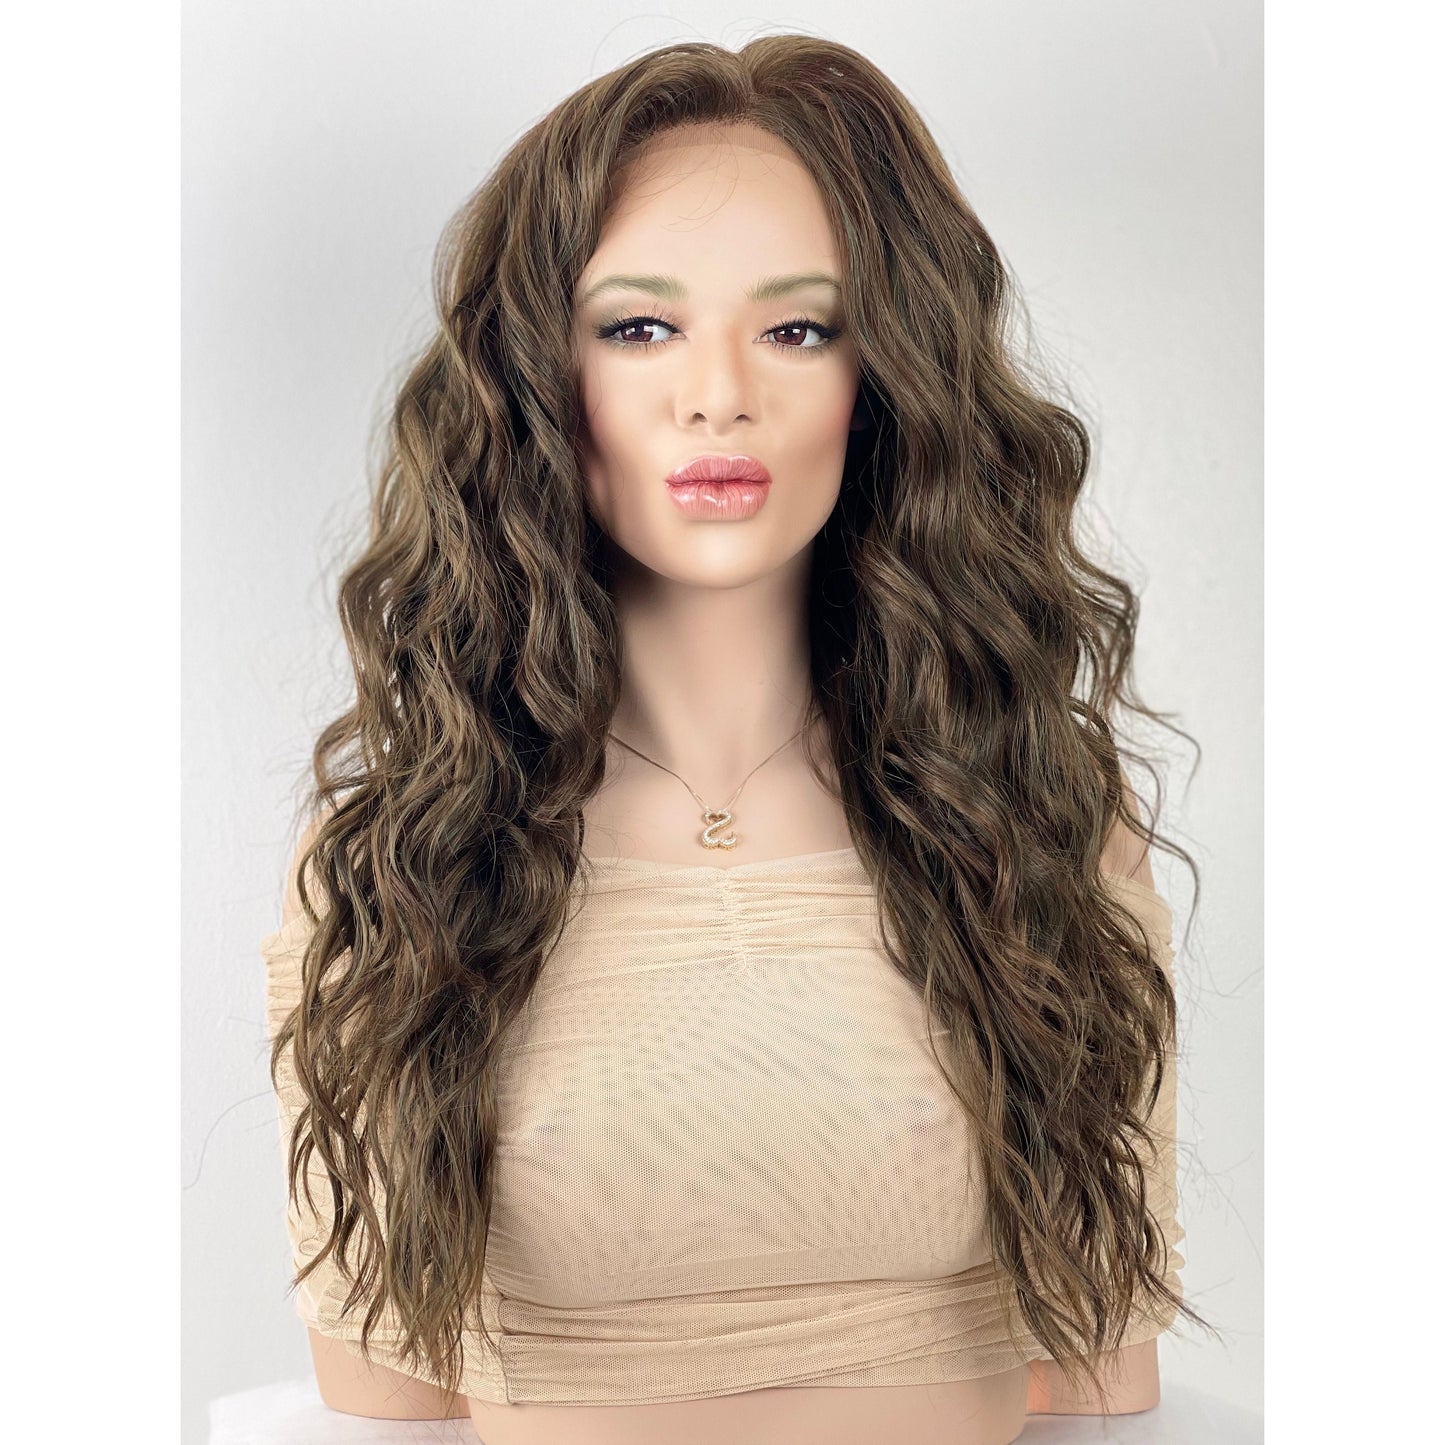 Brown Green PeekABoo Highlights 13x6 wide part lace front wig / Human Hair Blend Wig